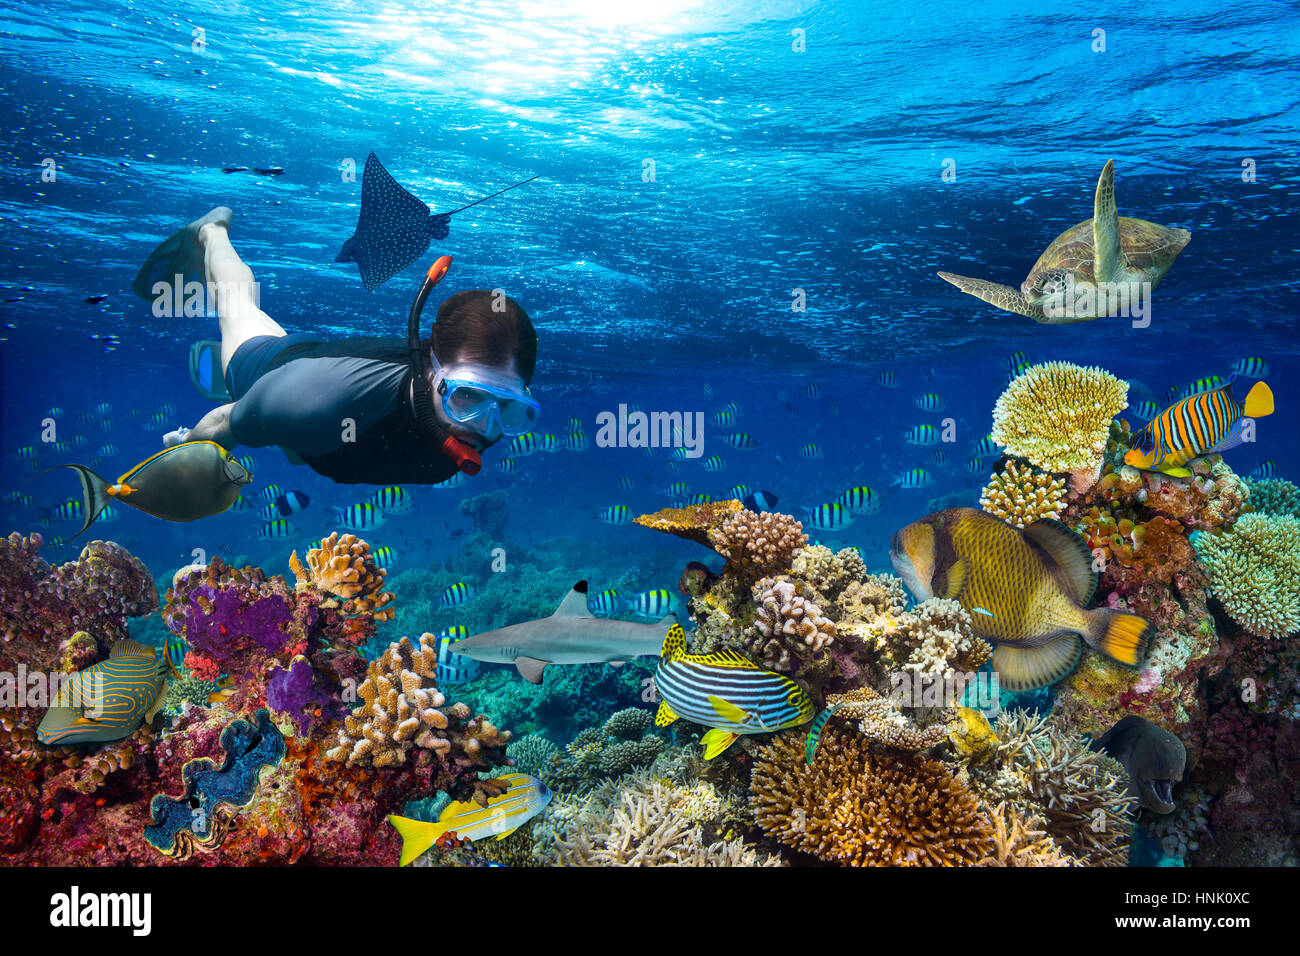 young men snorkling exploring underwater coral reef landscape background  in the deep blue ocean with colorful fish and marine life Stock Photo